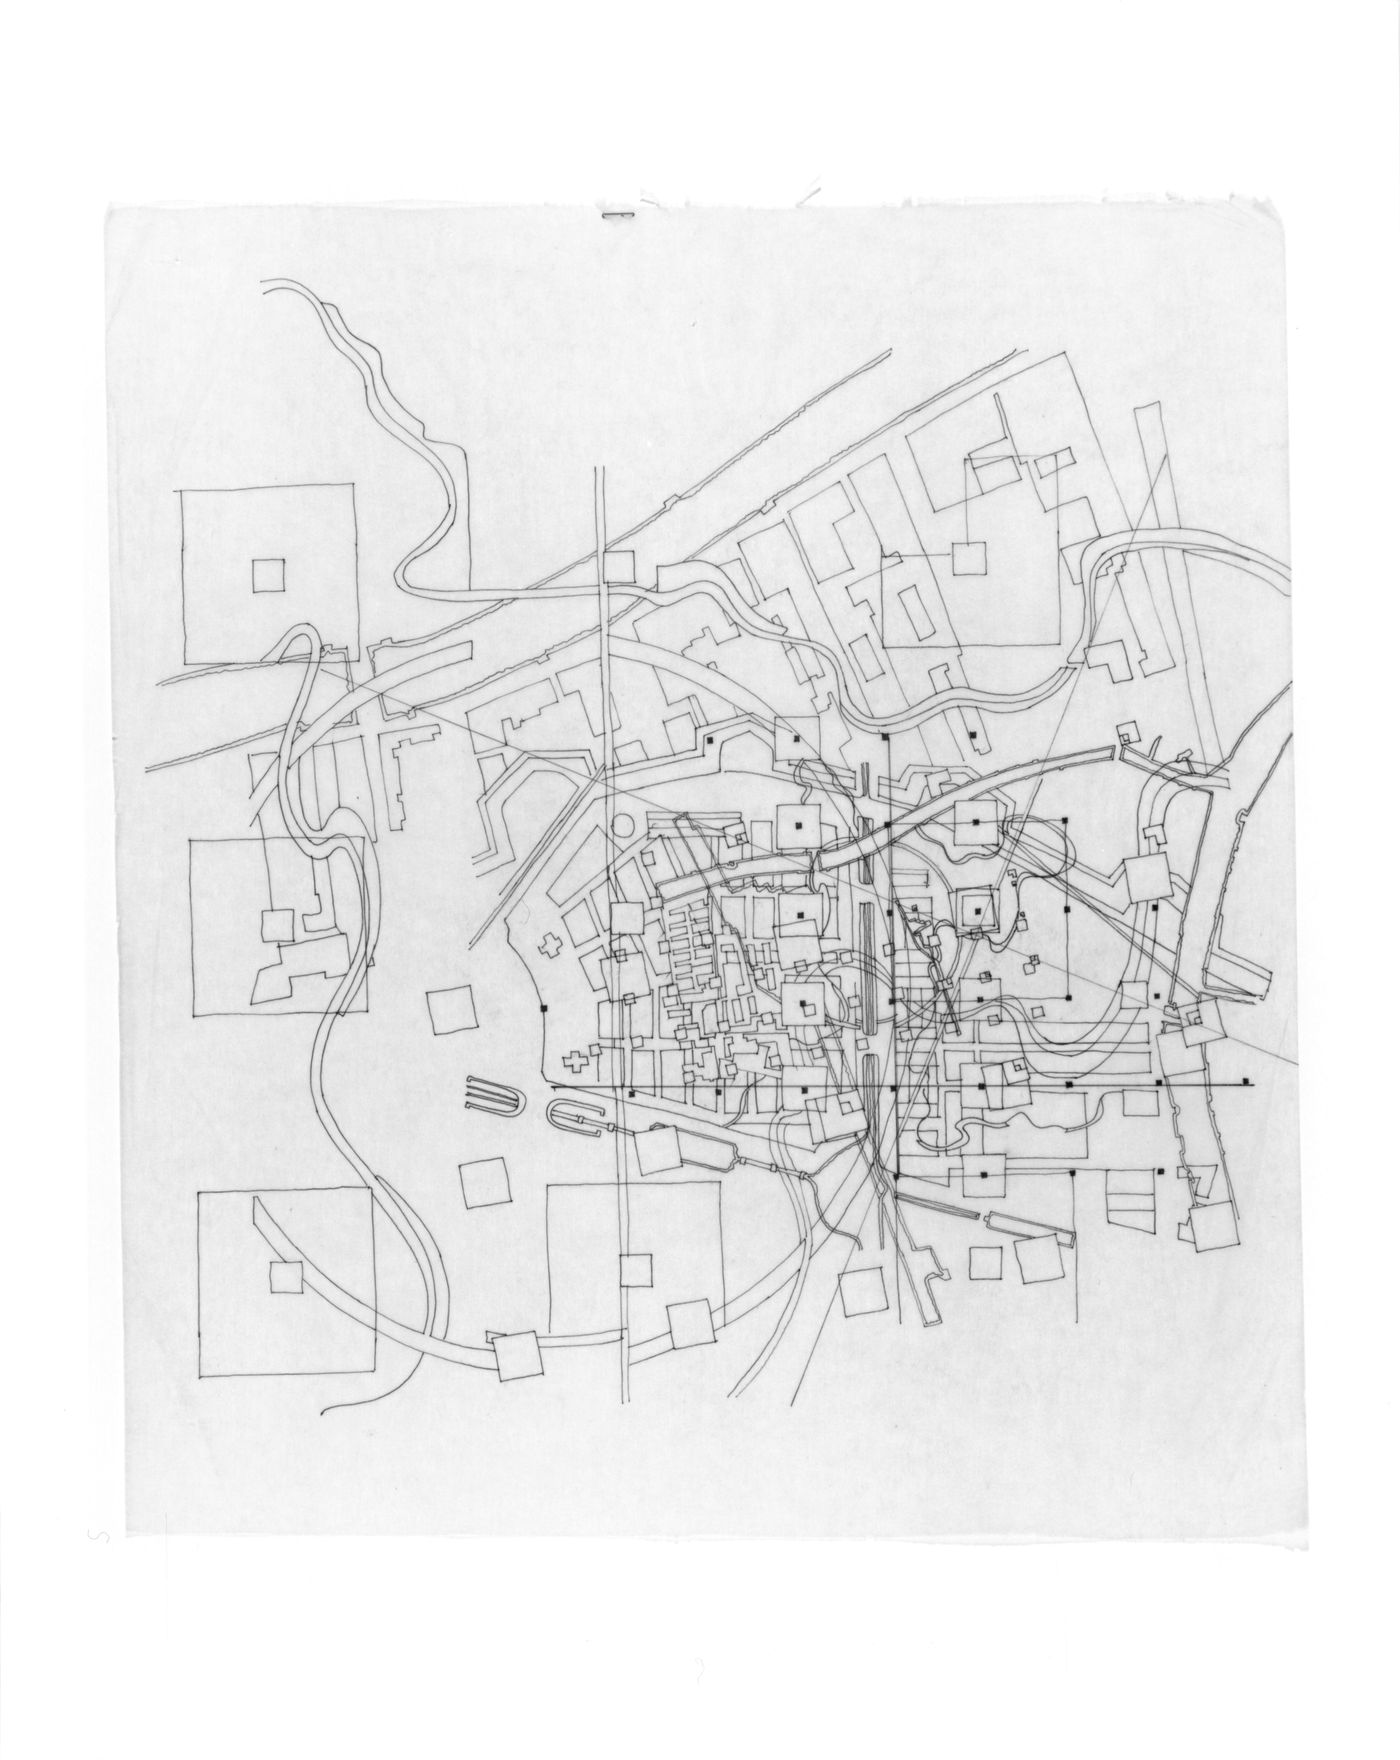 Sketch site plan showing superposition of Cannaregio-West and La Villette sites at different scales